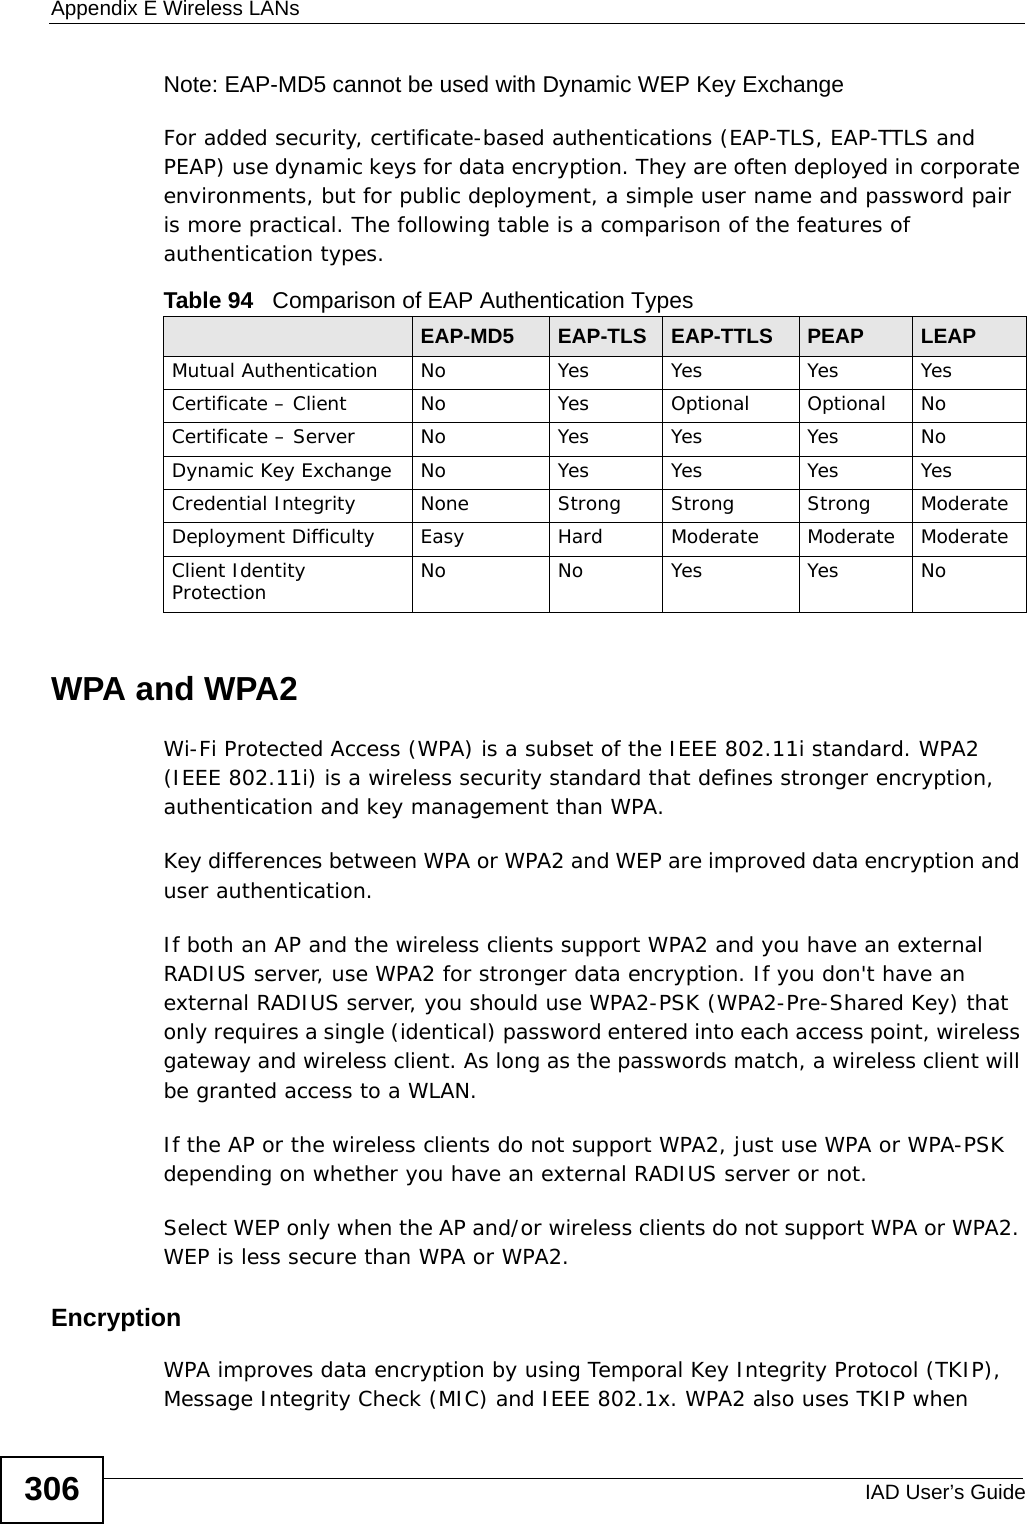 Appendix E Wireless LANsIAD User’s Guide306Note: EAP-MD5 cannot be used with Dynamic WEP Key ExchangeFor added security, certificate-based authentications (EAP-TLS, EAP-TTLS and PEAP) use dynamic keys for data encryption. They are often deployed in corporate environments, but for public deployment, a simple user name and password pair is more practical. The following table is a comparison of the features of authentication types.WPA and WPA2Wi-Fi Protected Access (WPA) is a subset of the IEEE 802.11i standard. WPA2 (IEEE 802.11i) is a wireless security standard that defines stronger encryption, authentication and key management than WPA. Key differences between WPA or WPA2 and WEP are improved data encryption and user authentication.If both an AP and the wireless clients support WPA2 and you have an external RADIUS server, use WPA2 for stronger data encryption. If you don&apos;t have an external RADIUS server, you should use WPA2-PSK (WPA2-Pre-Shared Key) that only requires a single (identical) password entered into each access point, wireless gateway and wireless client. As long as the passwords match, a wireless client will be granted access to a WLAN. If the AP or the wireless clients do not support WPA2, just use WPA or WPA-PSK depending on whether you have an external RADIUS server or not.Select WEP only when the AP and/or wireless clients do not support WPA or WPA2. WEP is less secure than WPA or WPA2.Encryption WPA improves data encryption by using Temporal Key Integrity Protocol (TKIP), Message Integrity Check (MIC) and IEEE 802.1x. WPA2 also uses TKIP when Table 94   Comparison of EAP Authentication TypesEAP-MD5 EAP-TLS EAP-TTLS PEAP LEAPMutual Authentication No Yes Yes Yes YesCertificate – Client No Yes Optional Optional NoCertificate – Server No Yes Yes Yes NoDynamic Key Exchange No Yes Yes Yes YesCredential Integrity None Strong Strong Strong ModerateDeployment Difficulty Easy Hard Moderate Moderate ModerateClient Identity Protection No No Yes Yes No